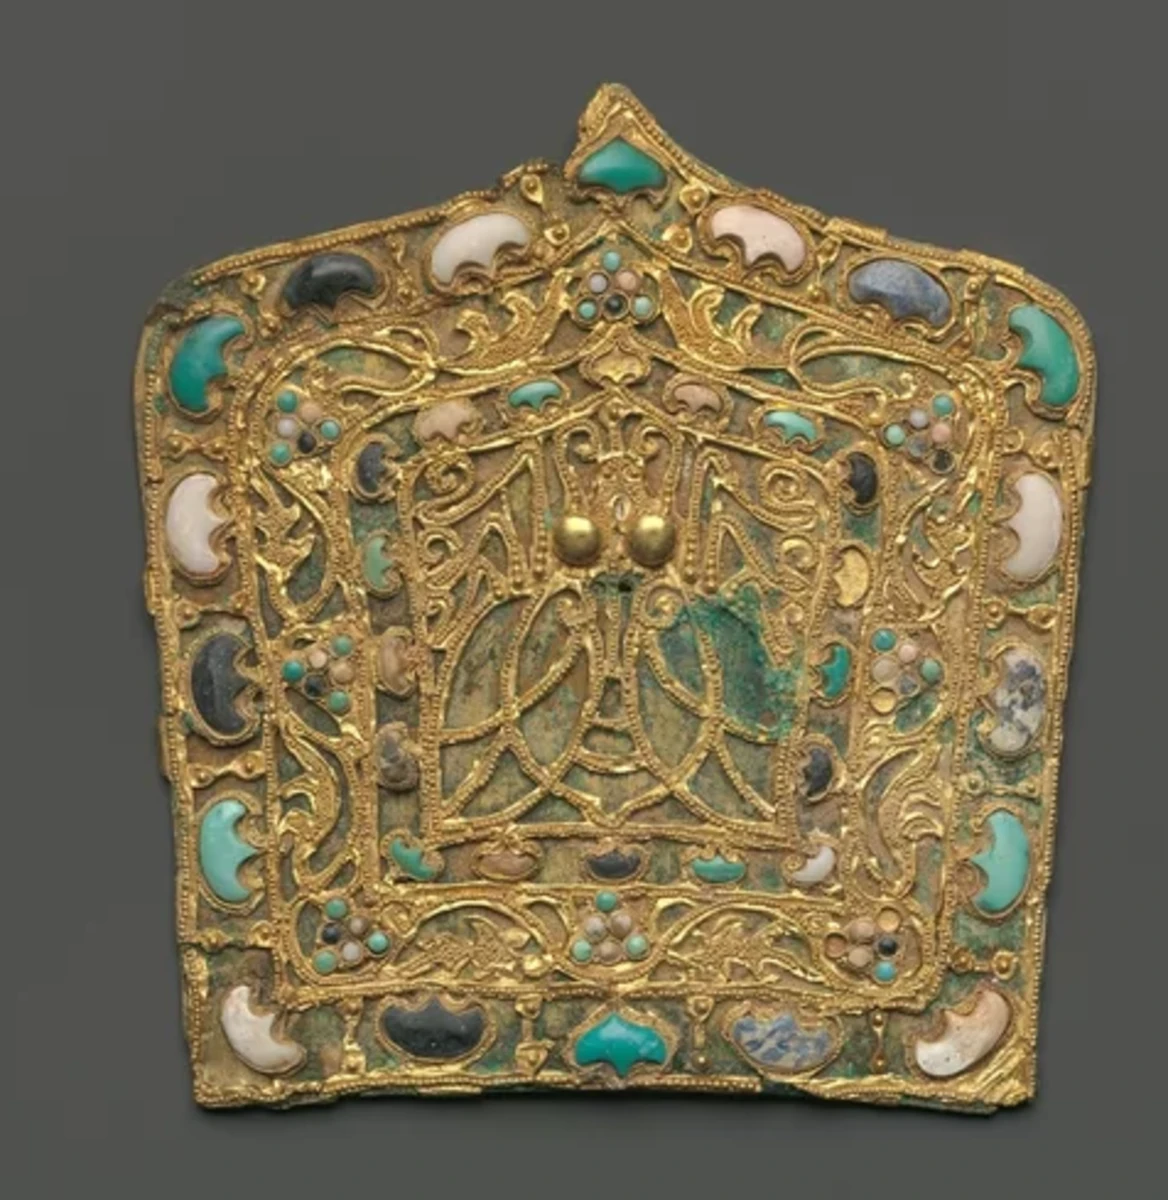 This ornamental plaque from the 4th-5th century features a cicada— an emblem of immortality— is framed by semi-precious stones and once decorated the hat of a government official.